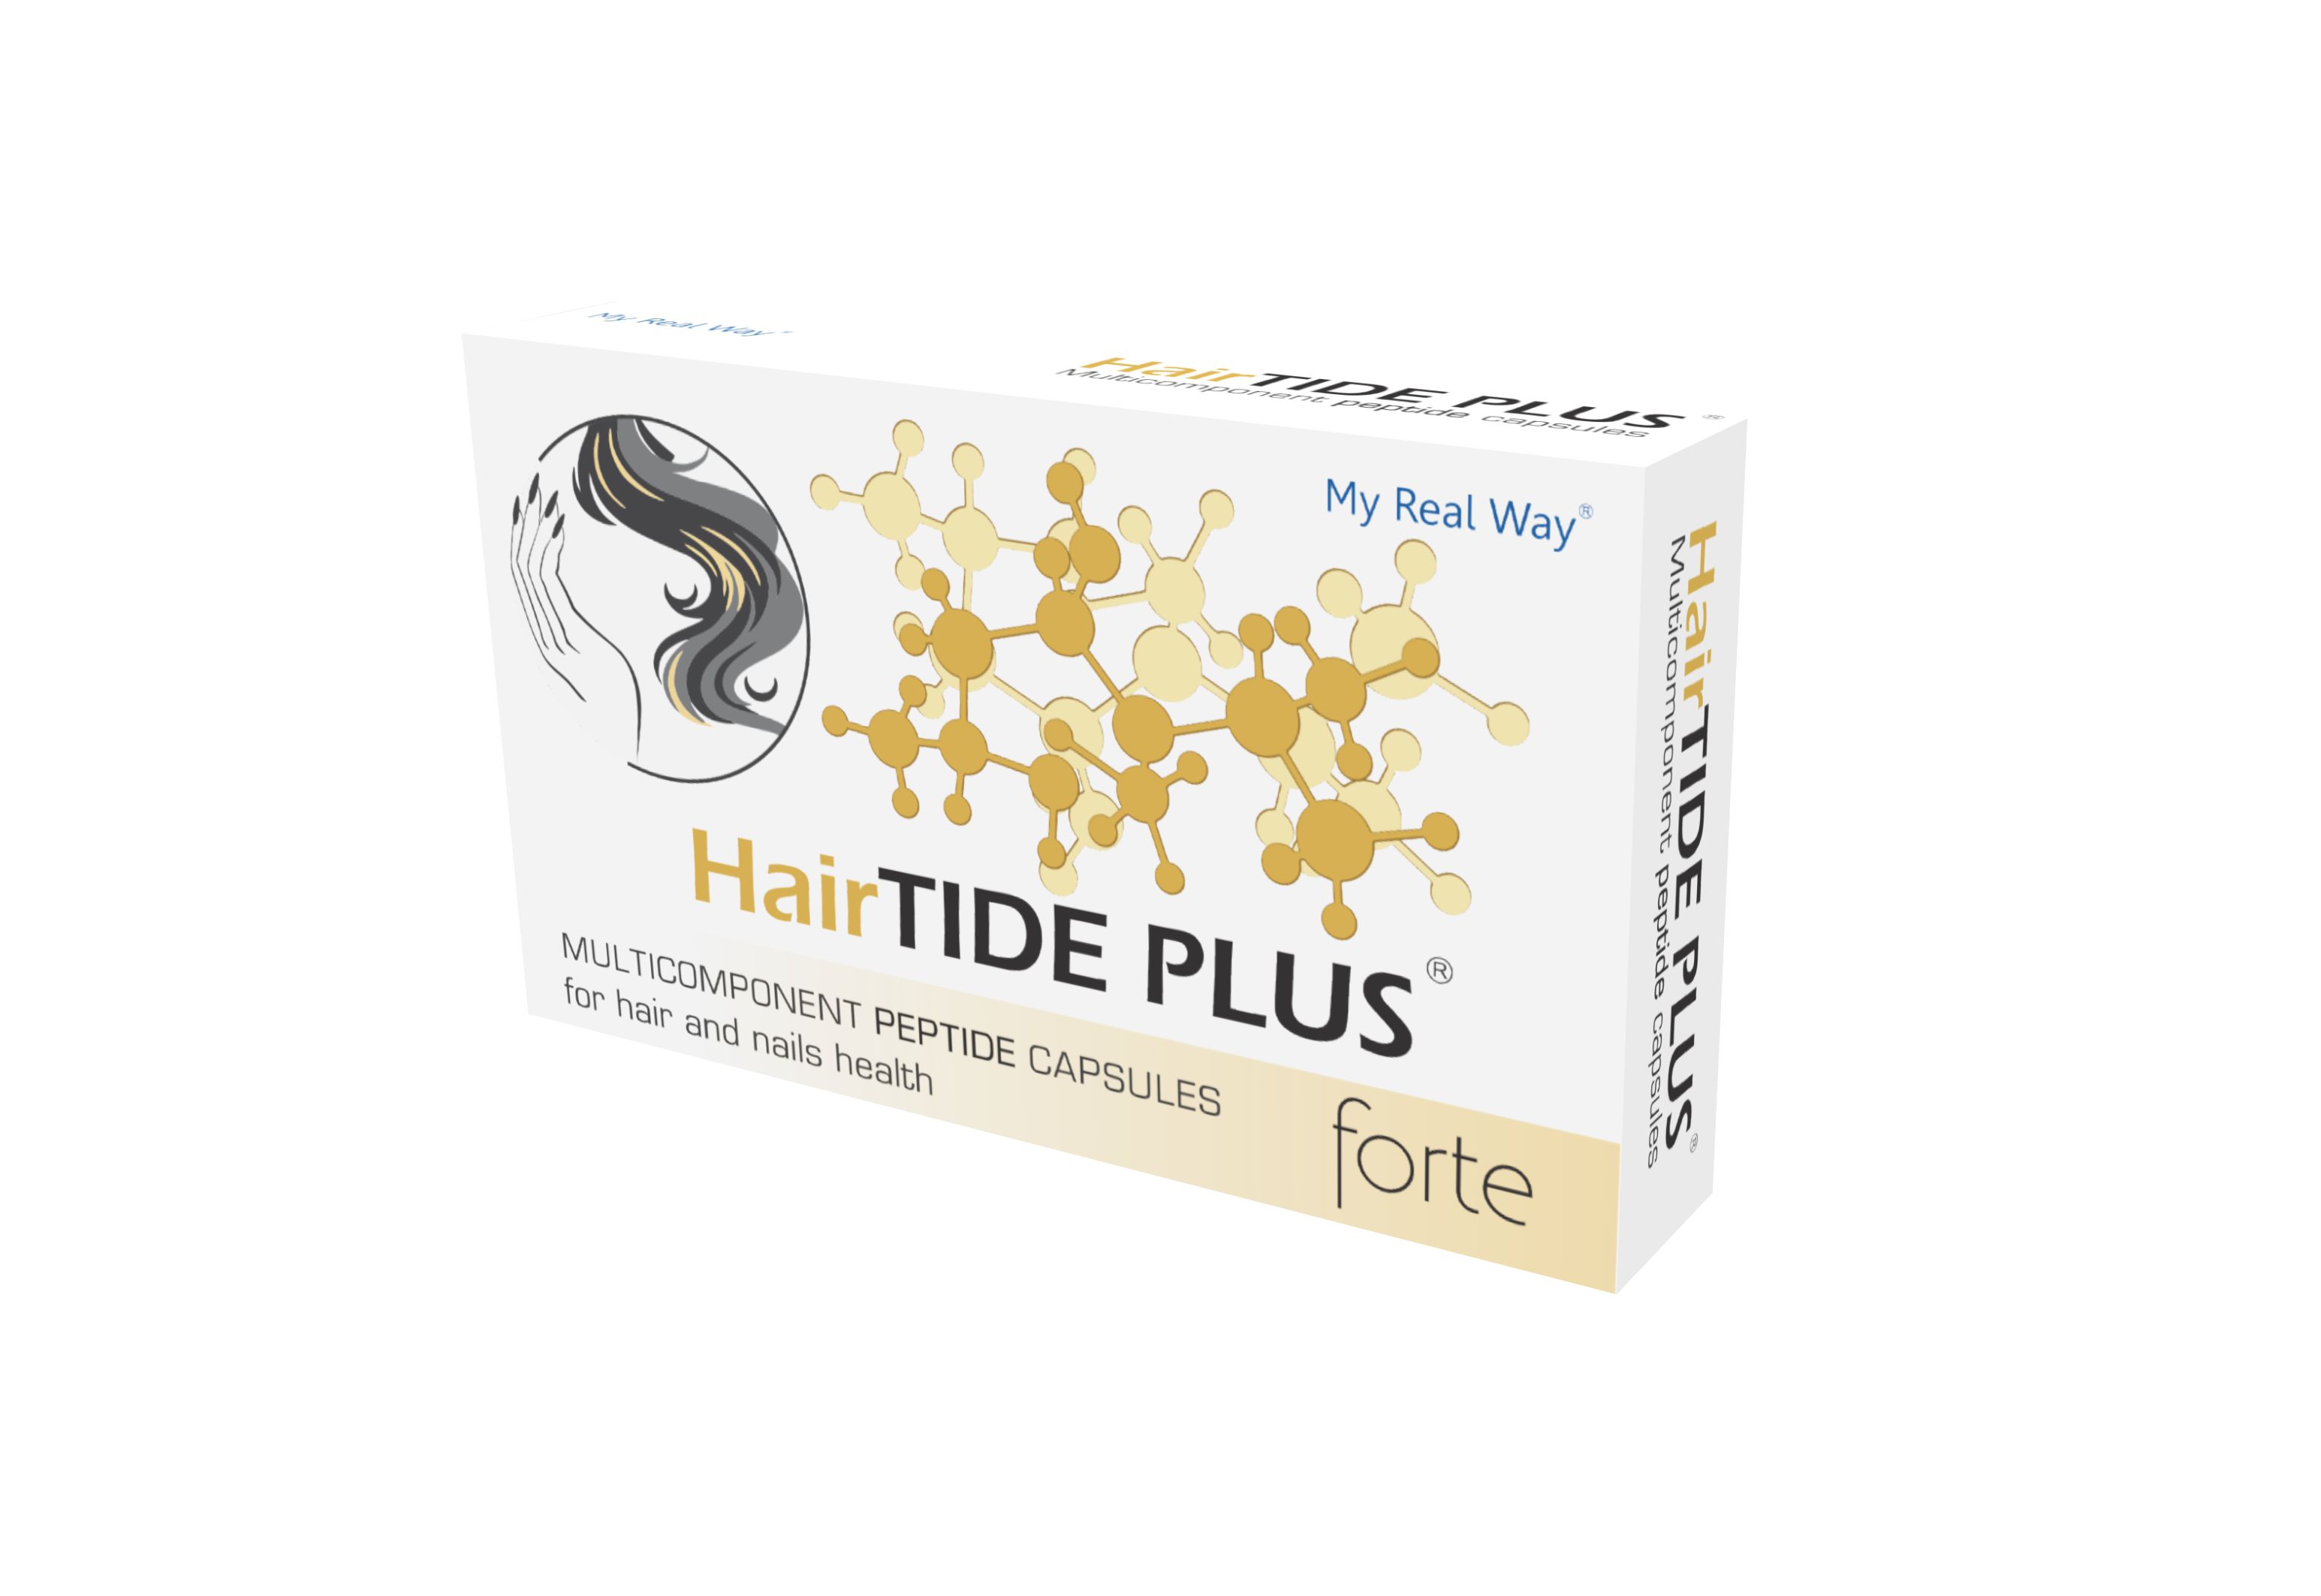 HairTIDE PLUS forte peptides for hair and nails